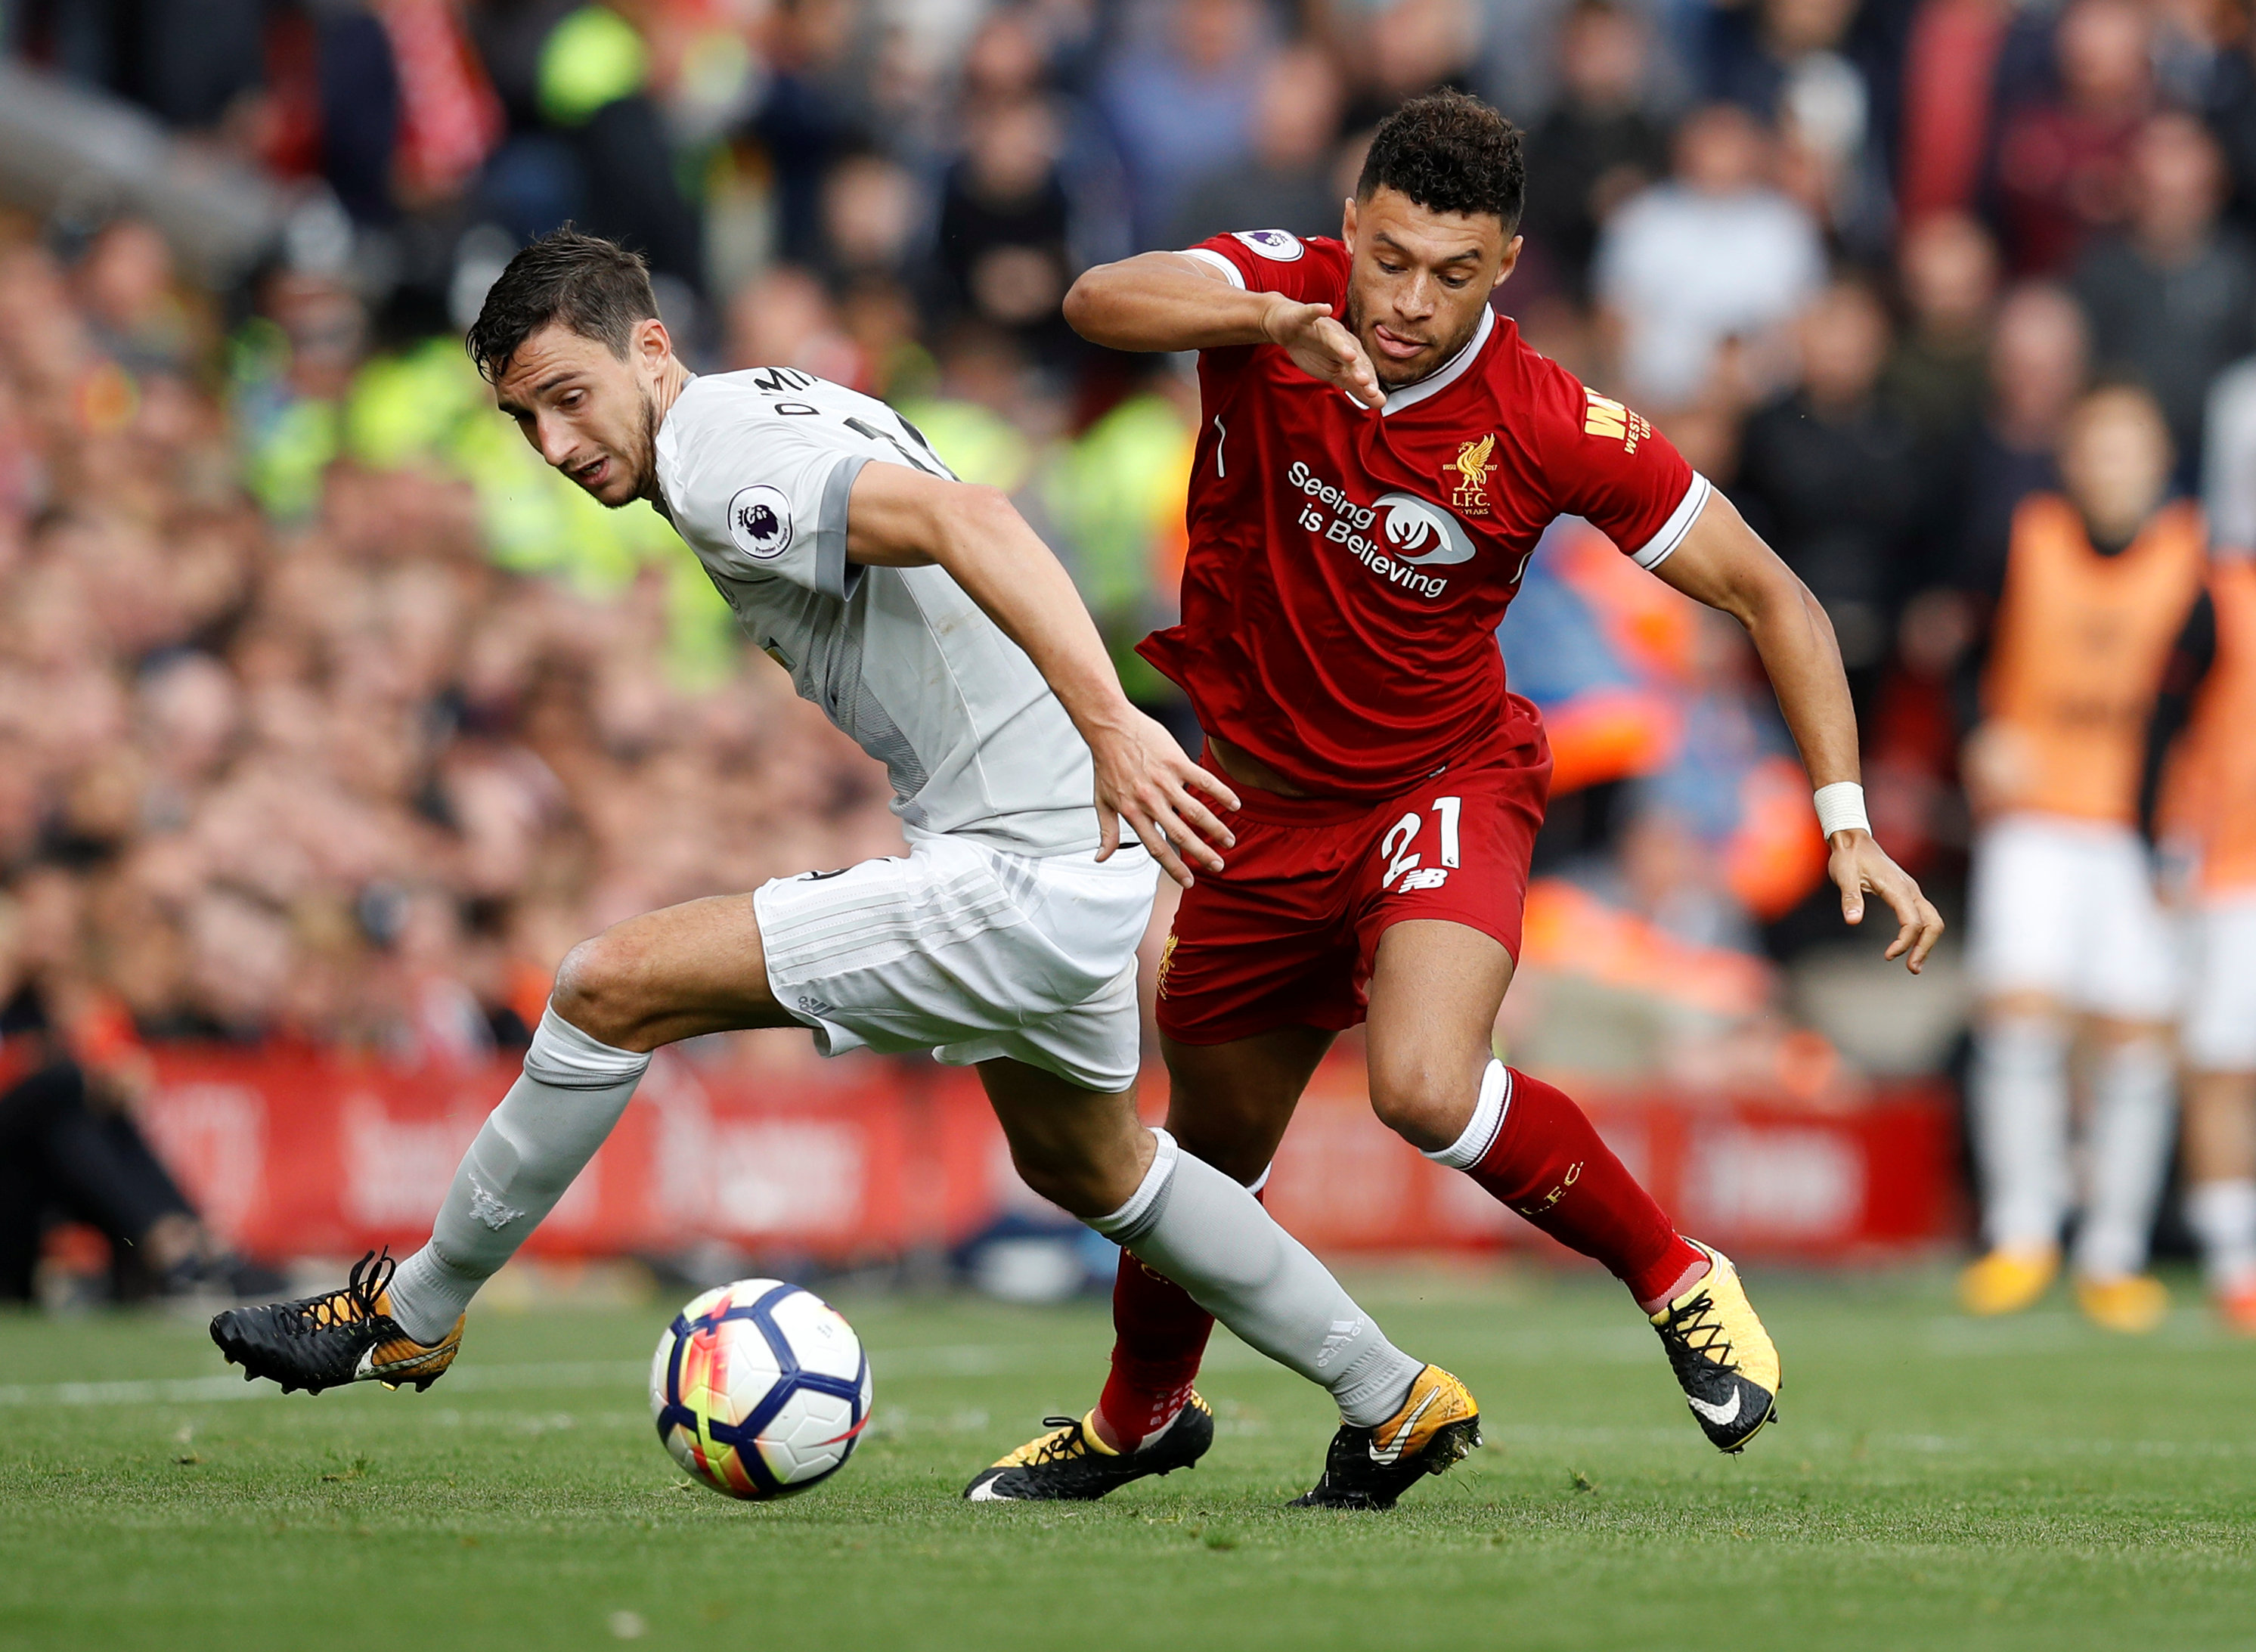 Football: Liverpool's Ox struggling to find his feet